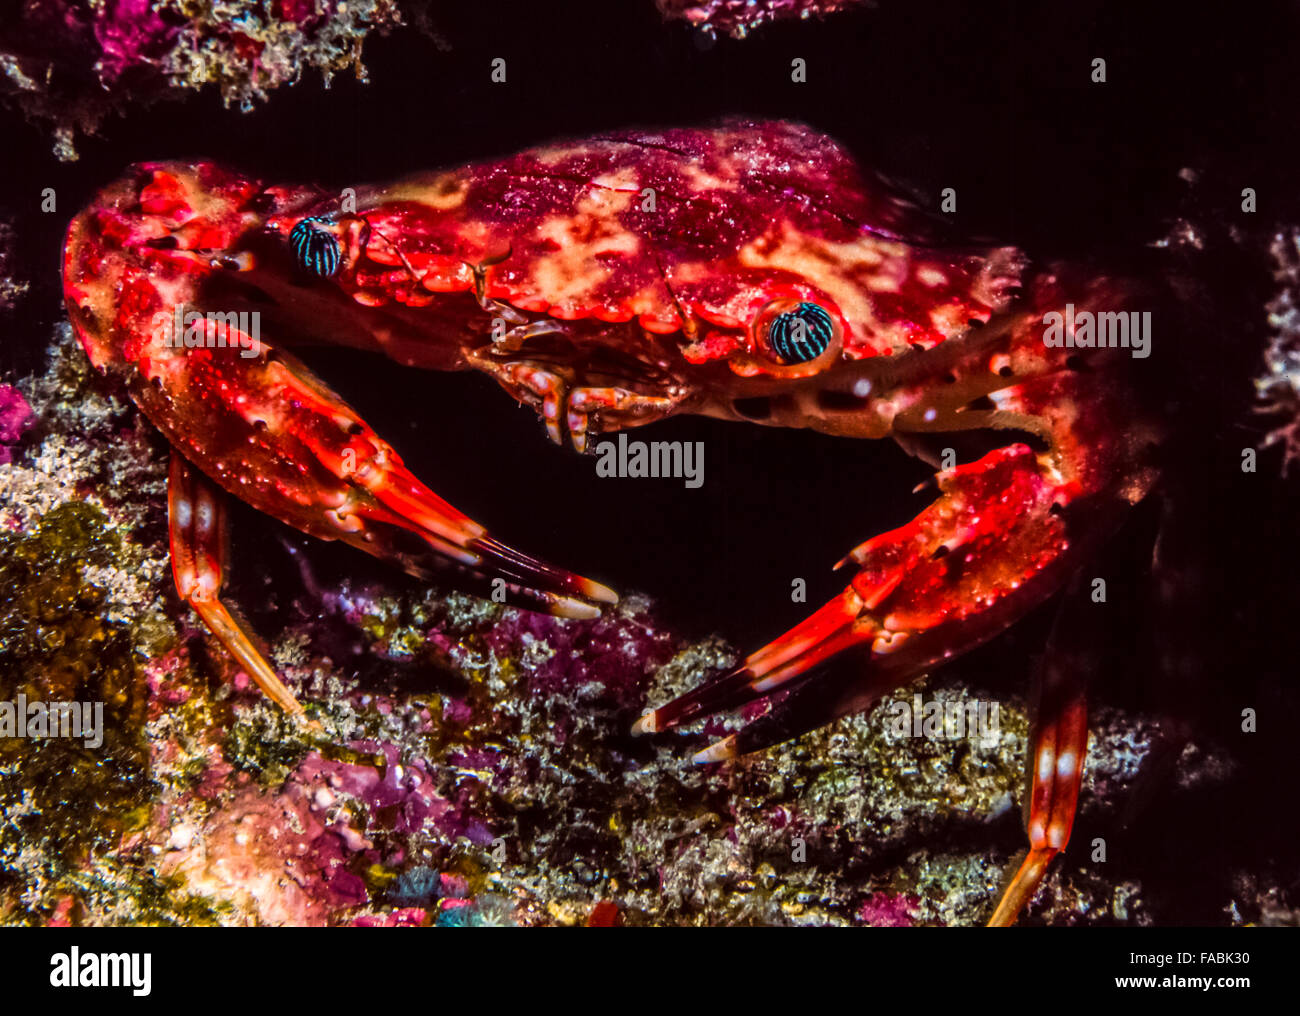 The Red-ridged Clinging Crab (Mithraculus forceps, formerly Mithrax forceps) is very similar to the popular Emerald Crab Stock Photo